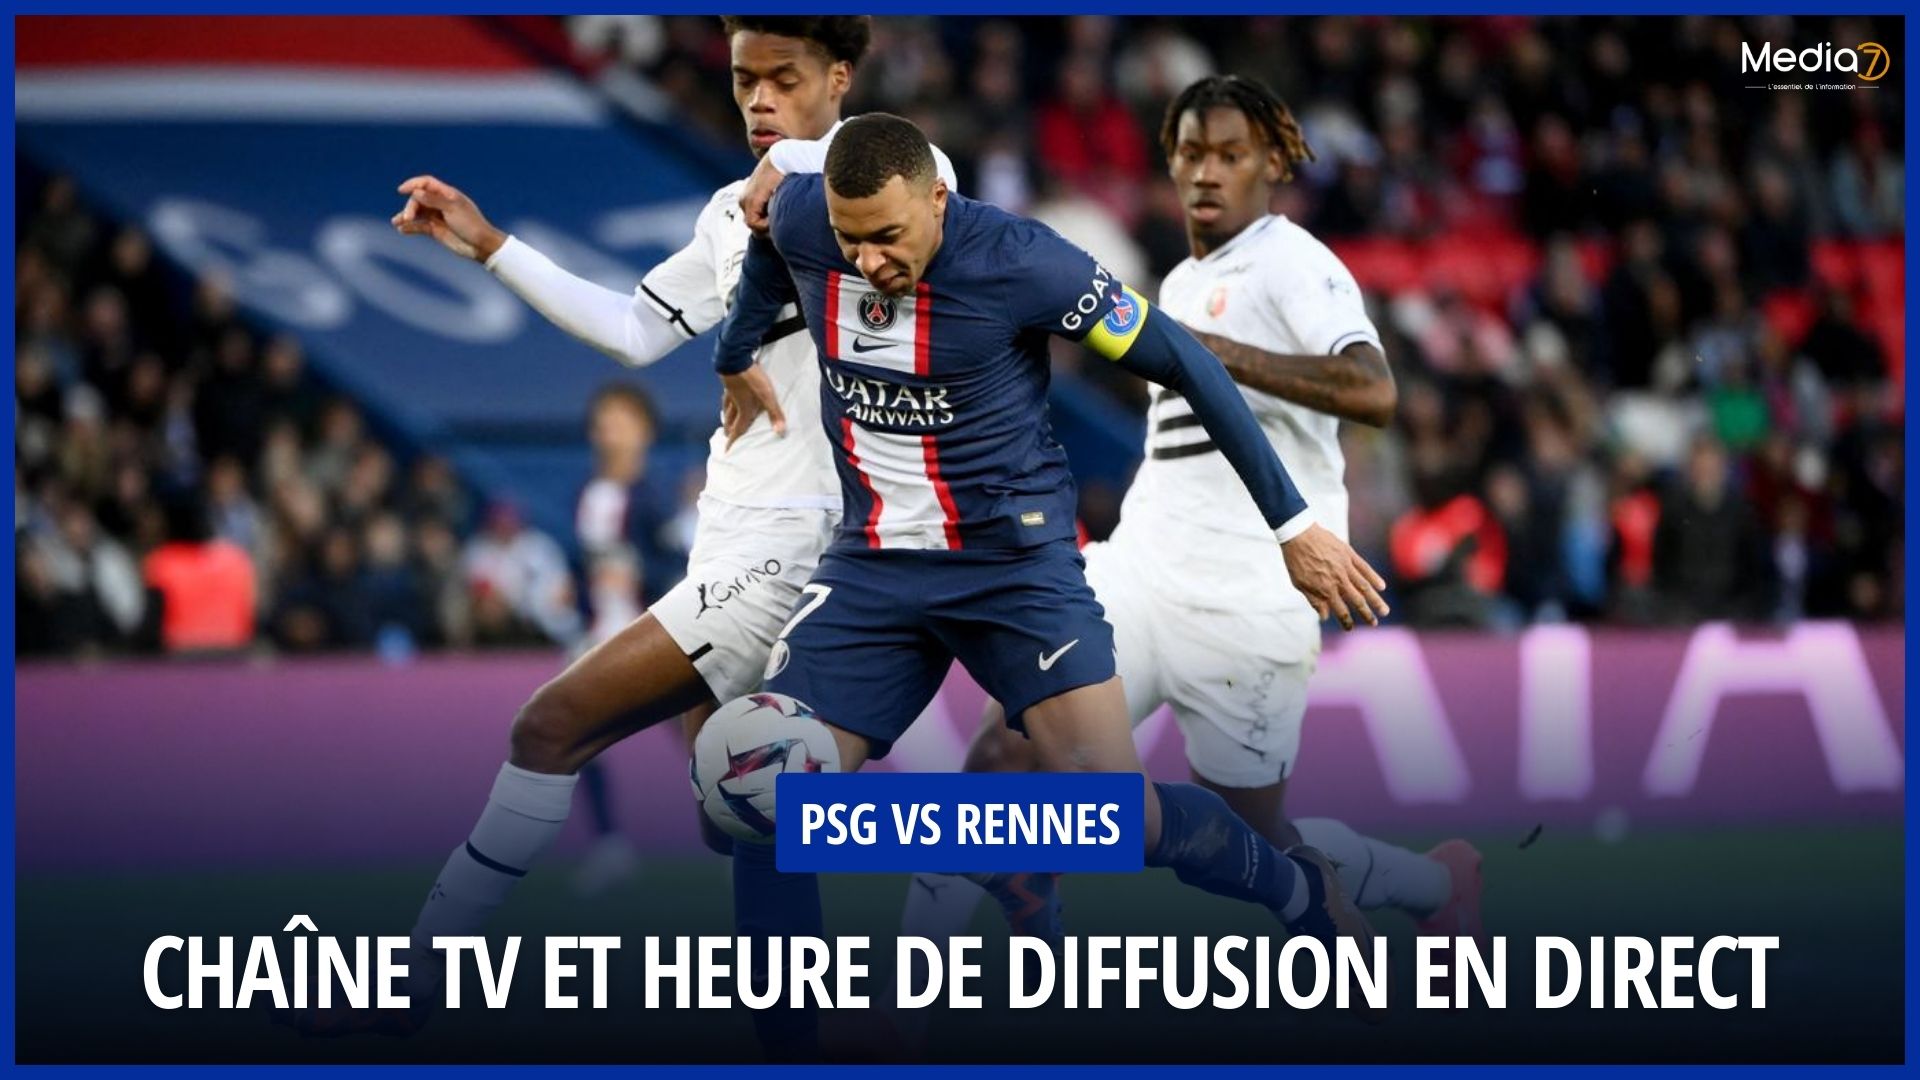 Live Stream: PSG vs Rennes - TV Channel and Schedule - Media7